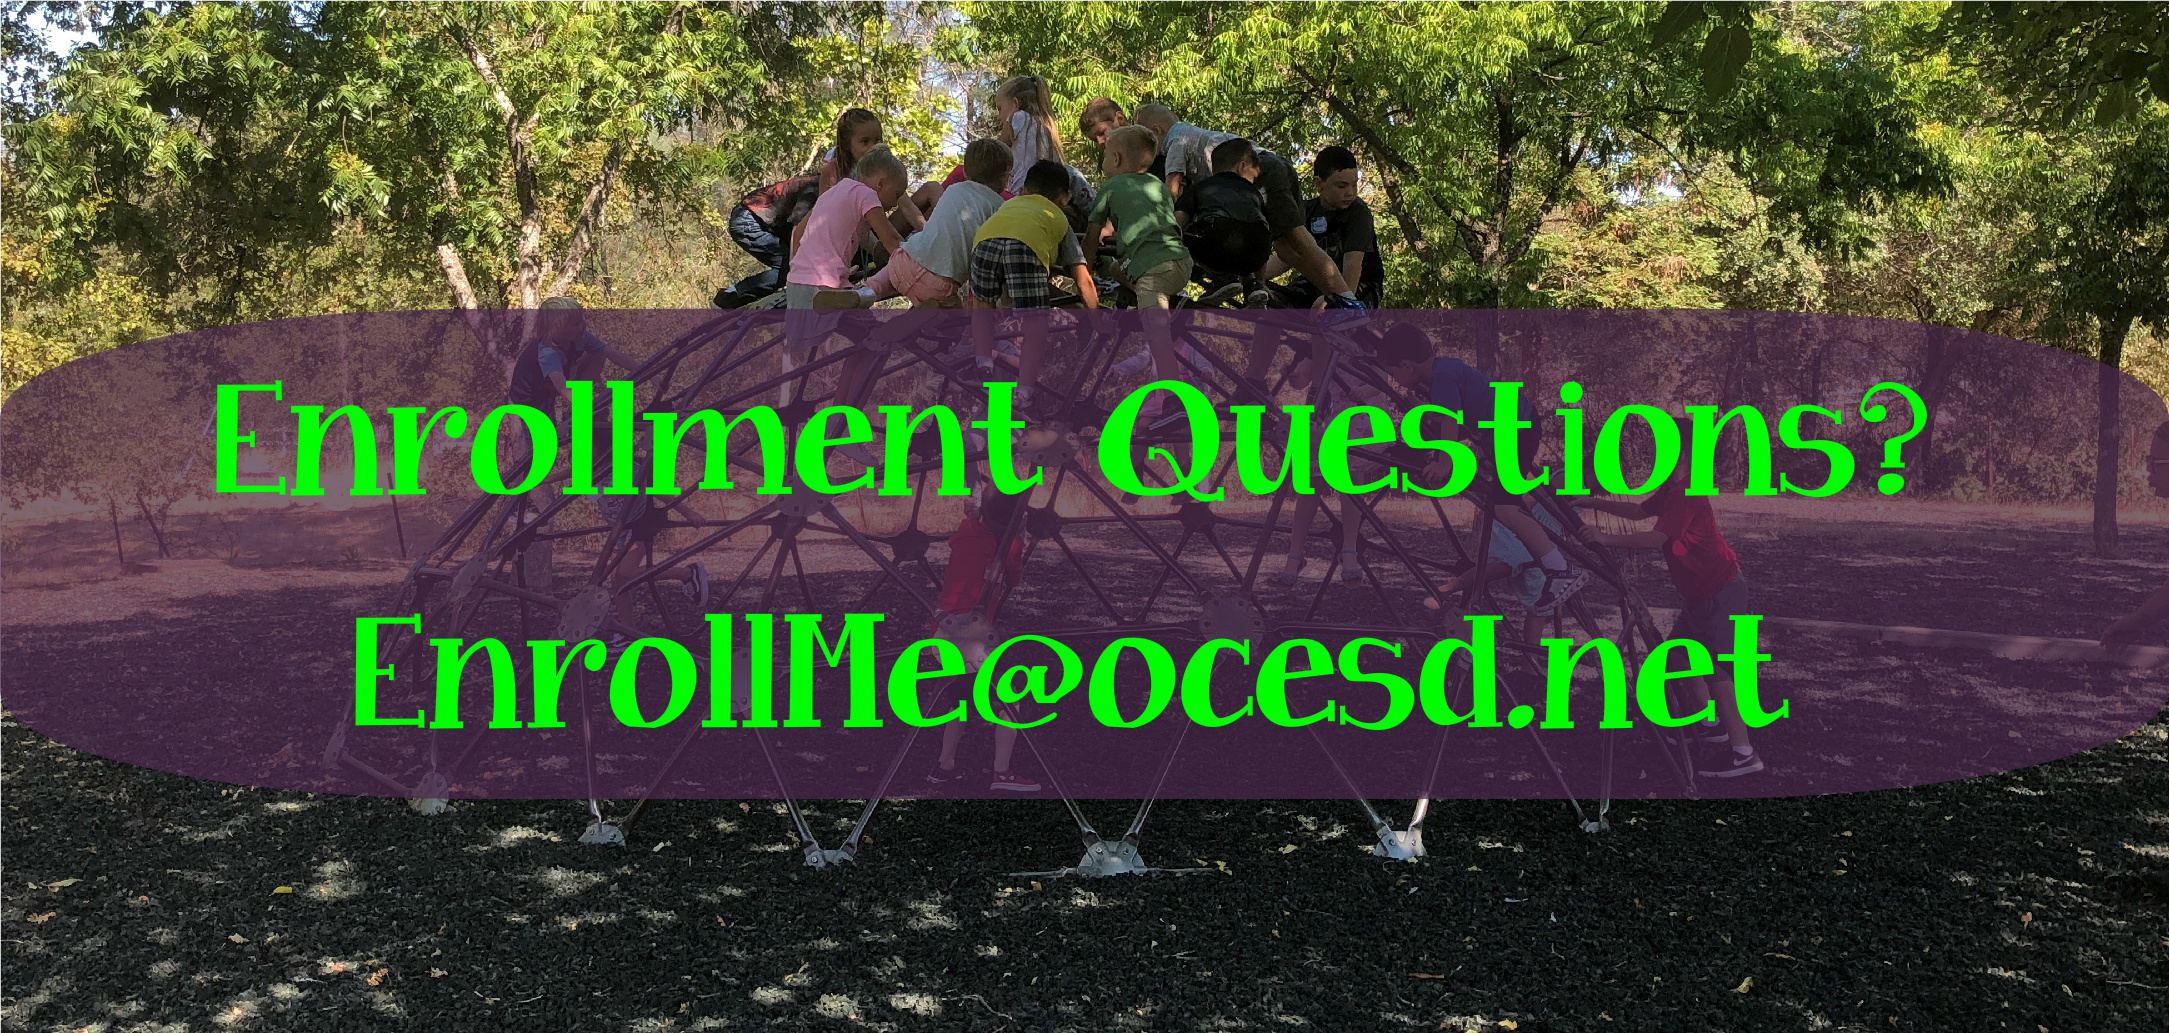 Have enrollment questions? Email us at EnrollMe@ocesd.net